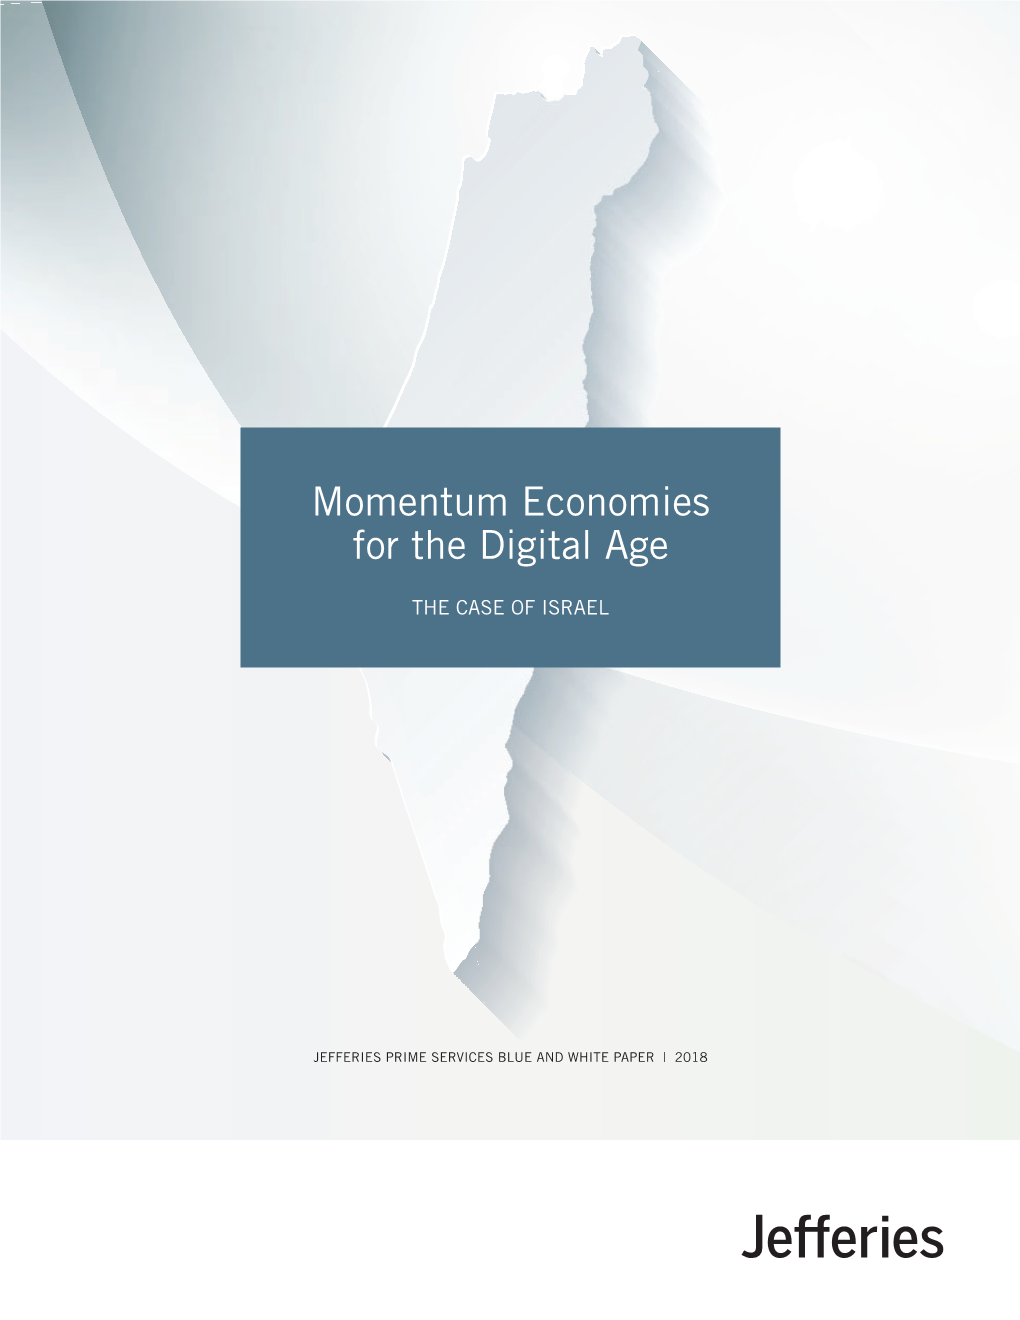 Momentum Economies for the Digital Age: the Case of Israel